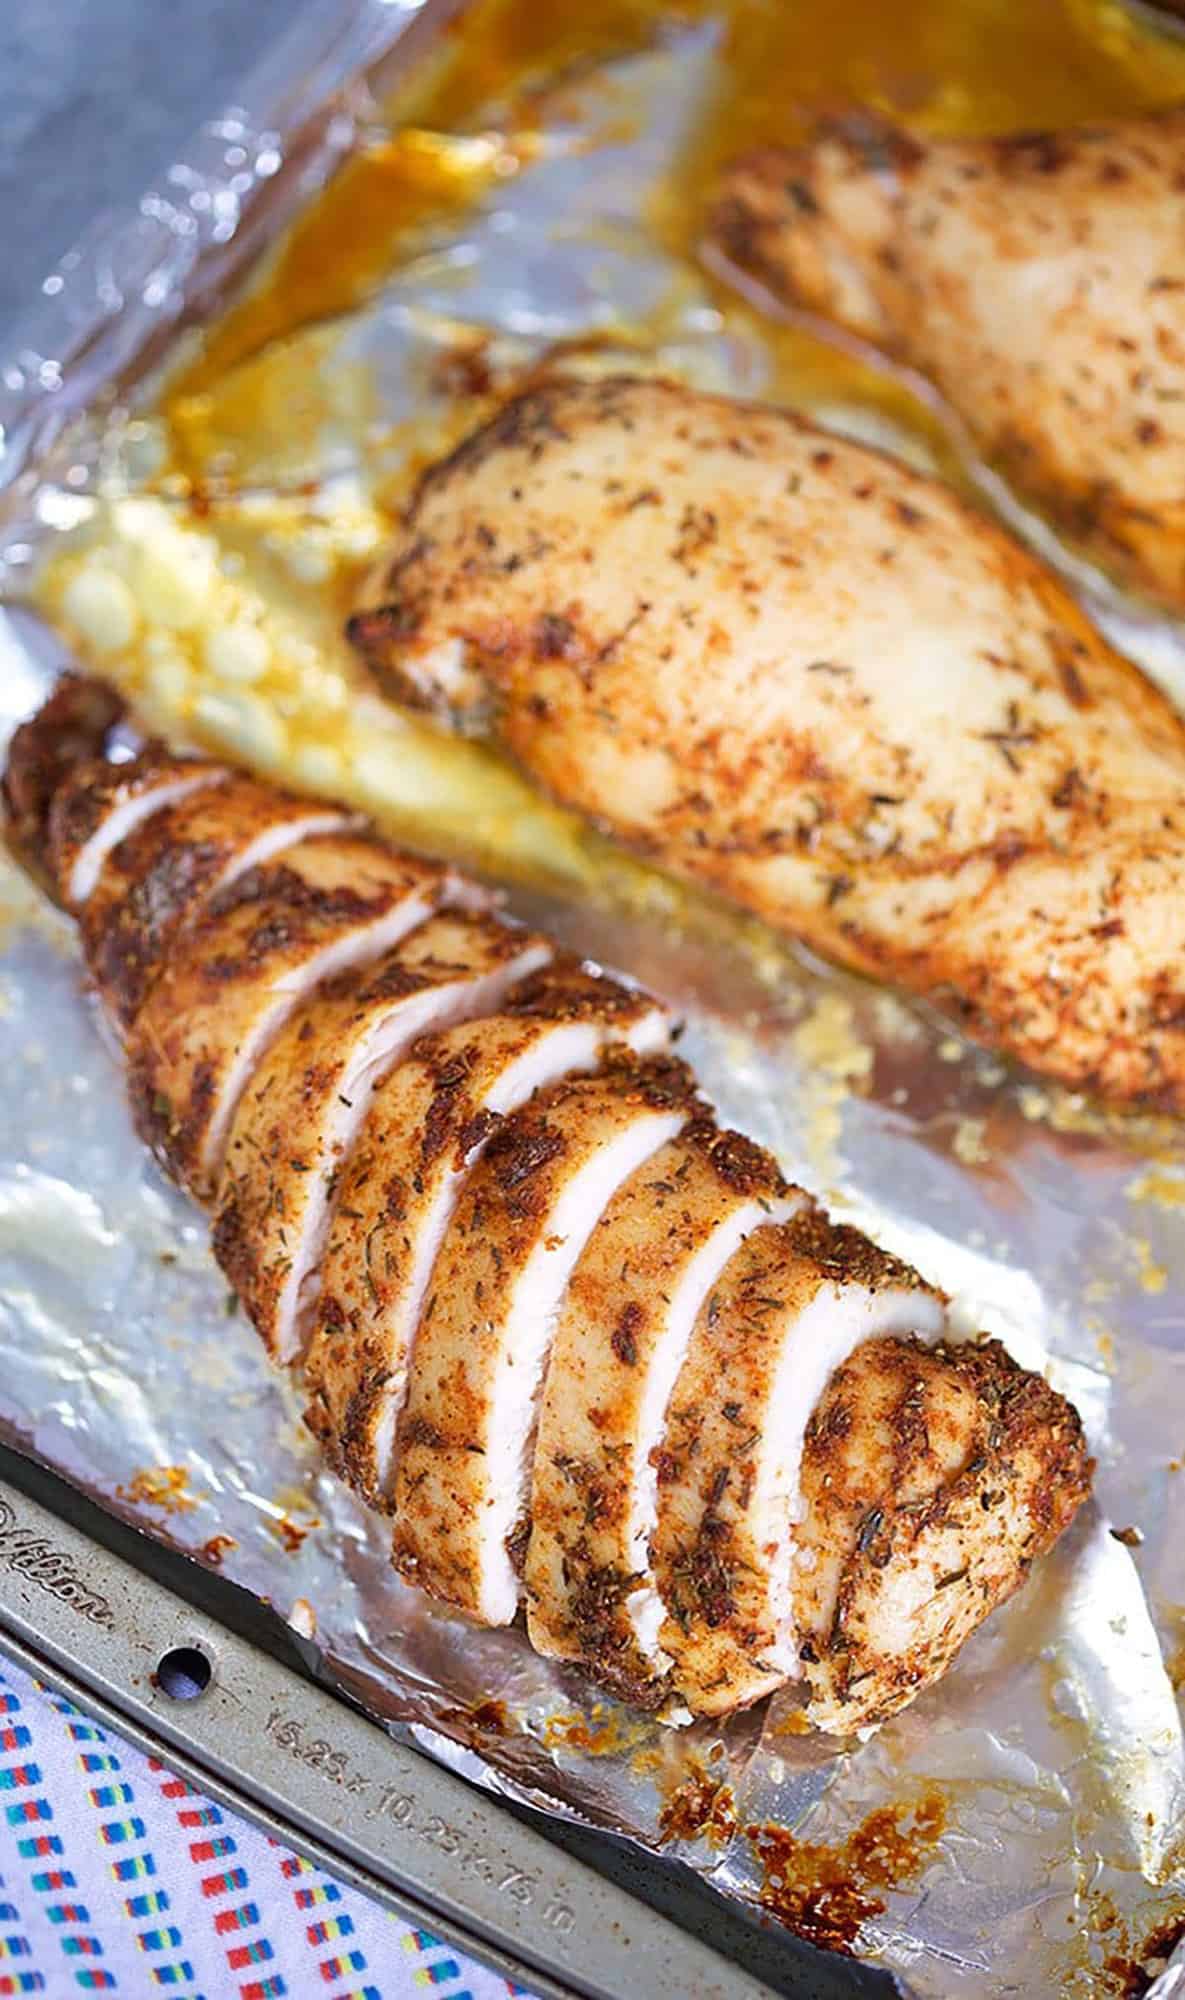 Sliced baked chicken breast on a baking sheet with foil.